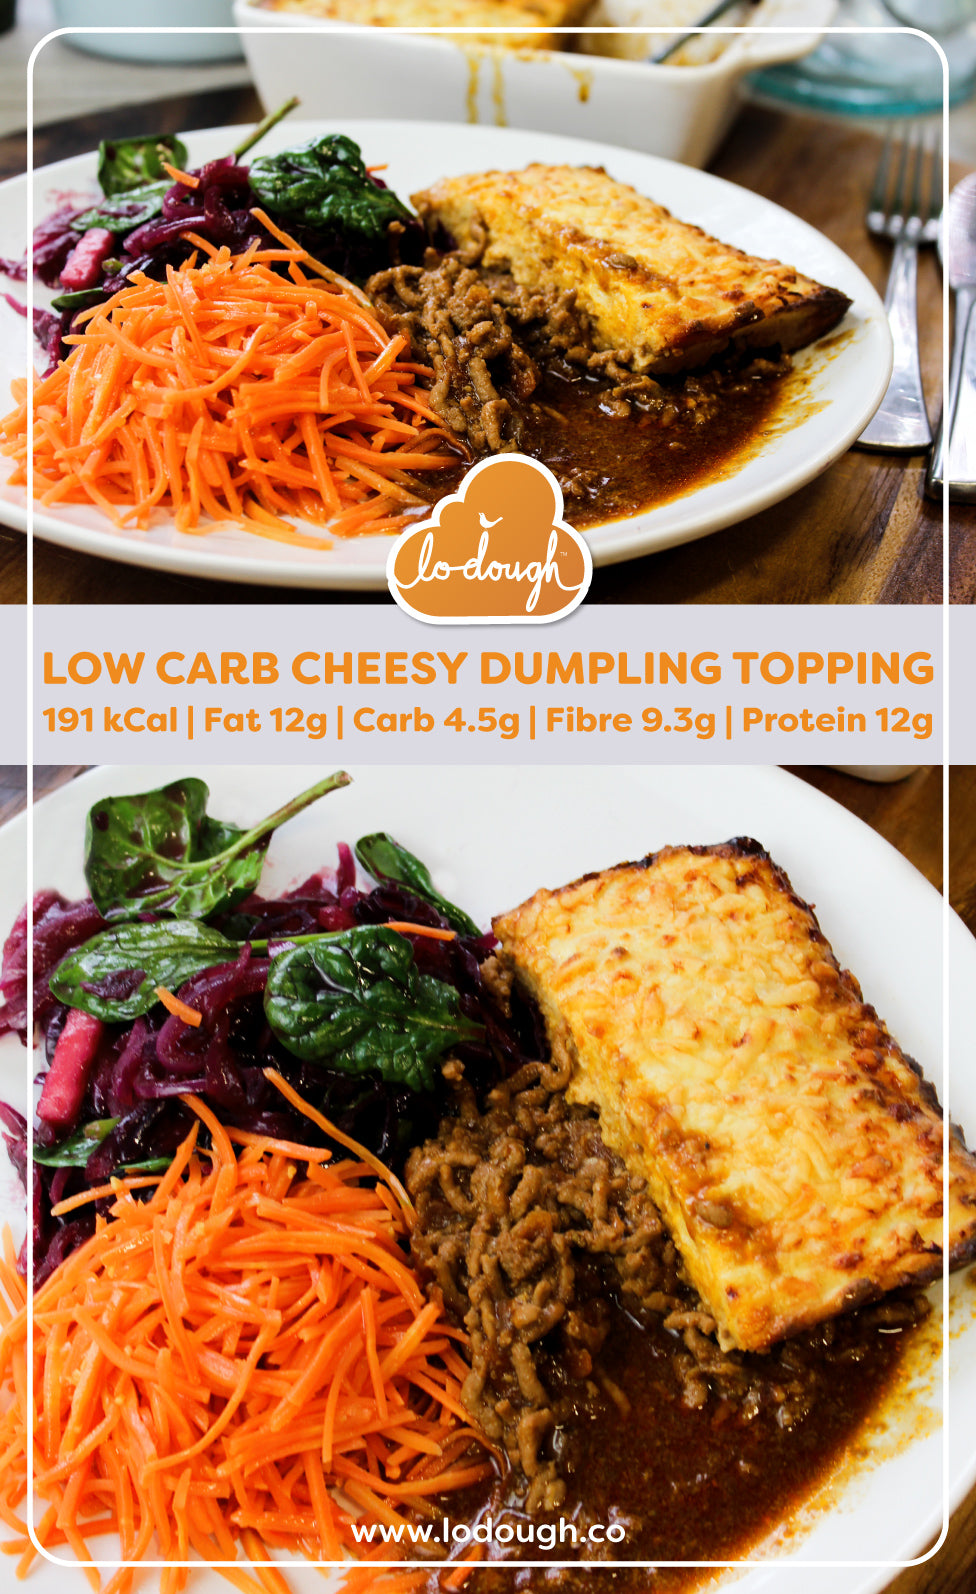 Low Carb Cheesy Dumpling Topping